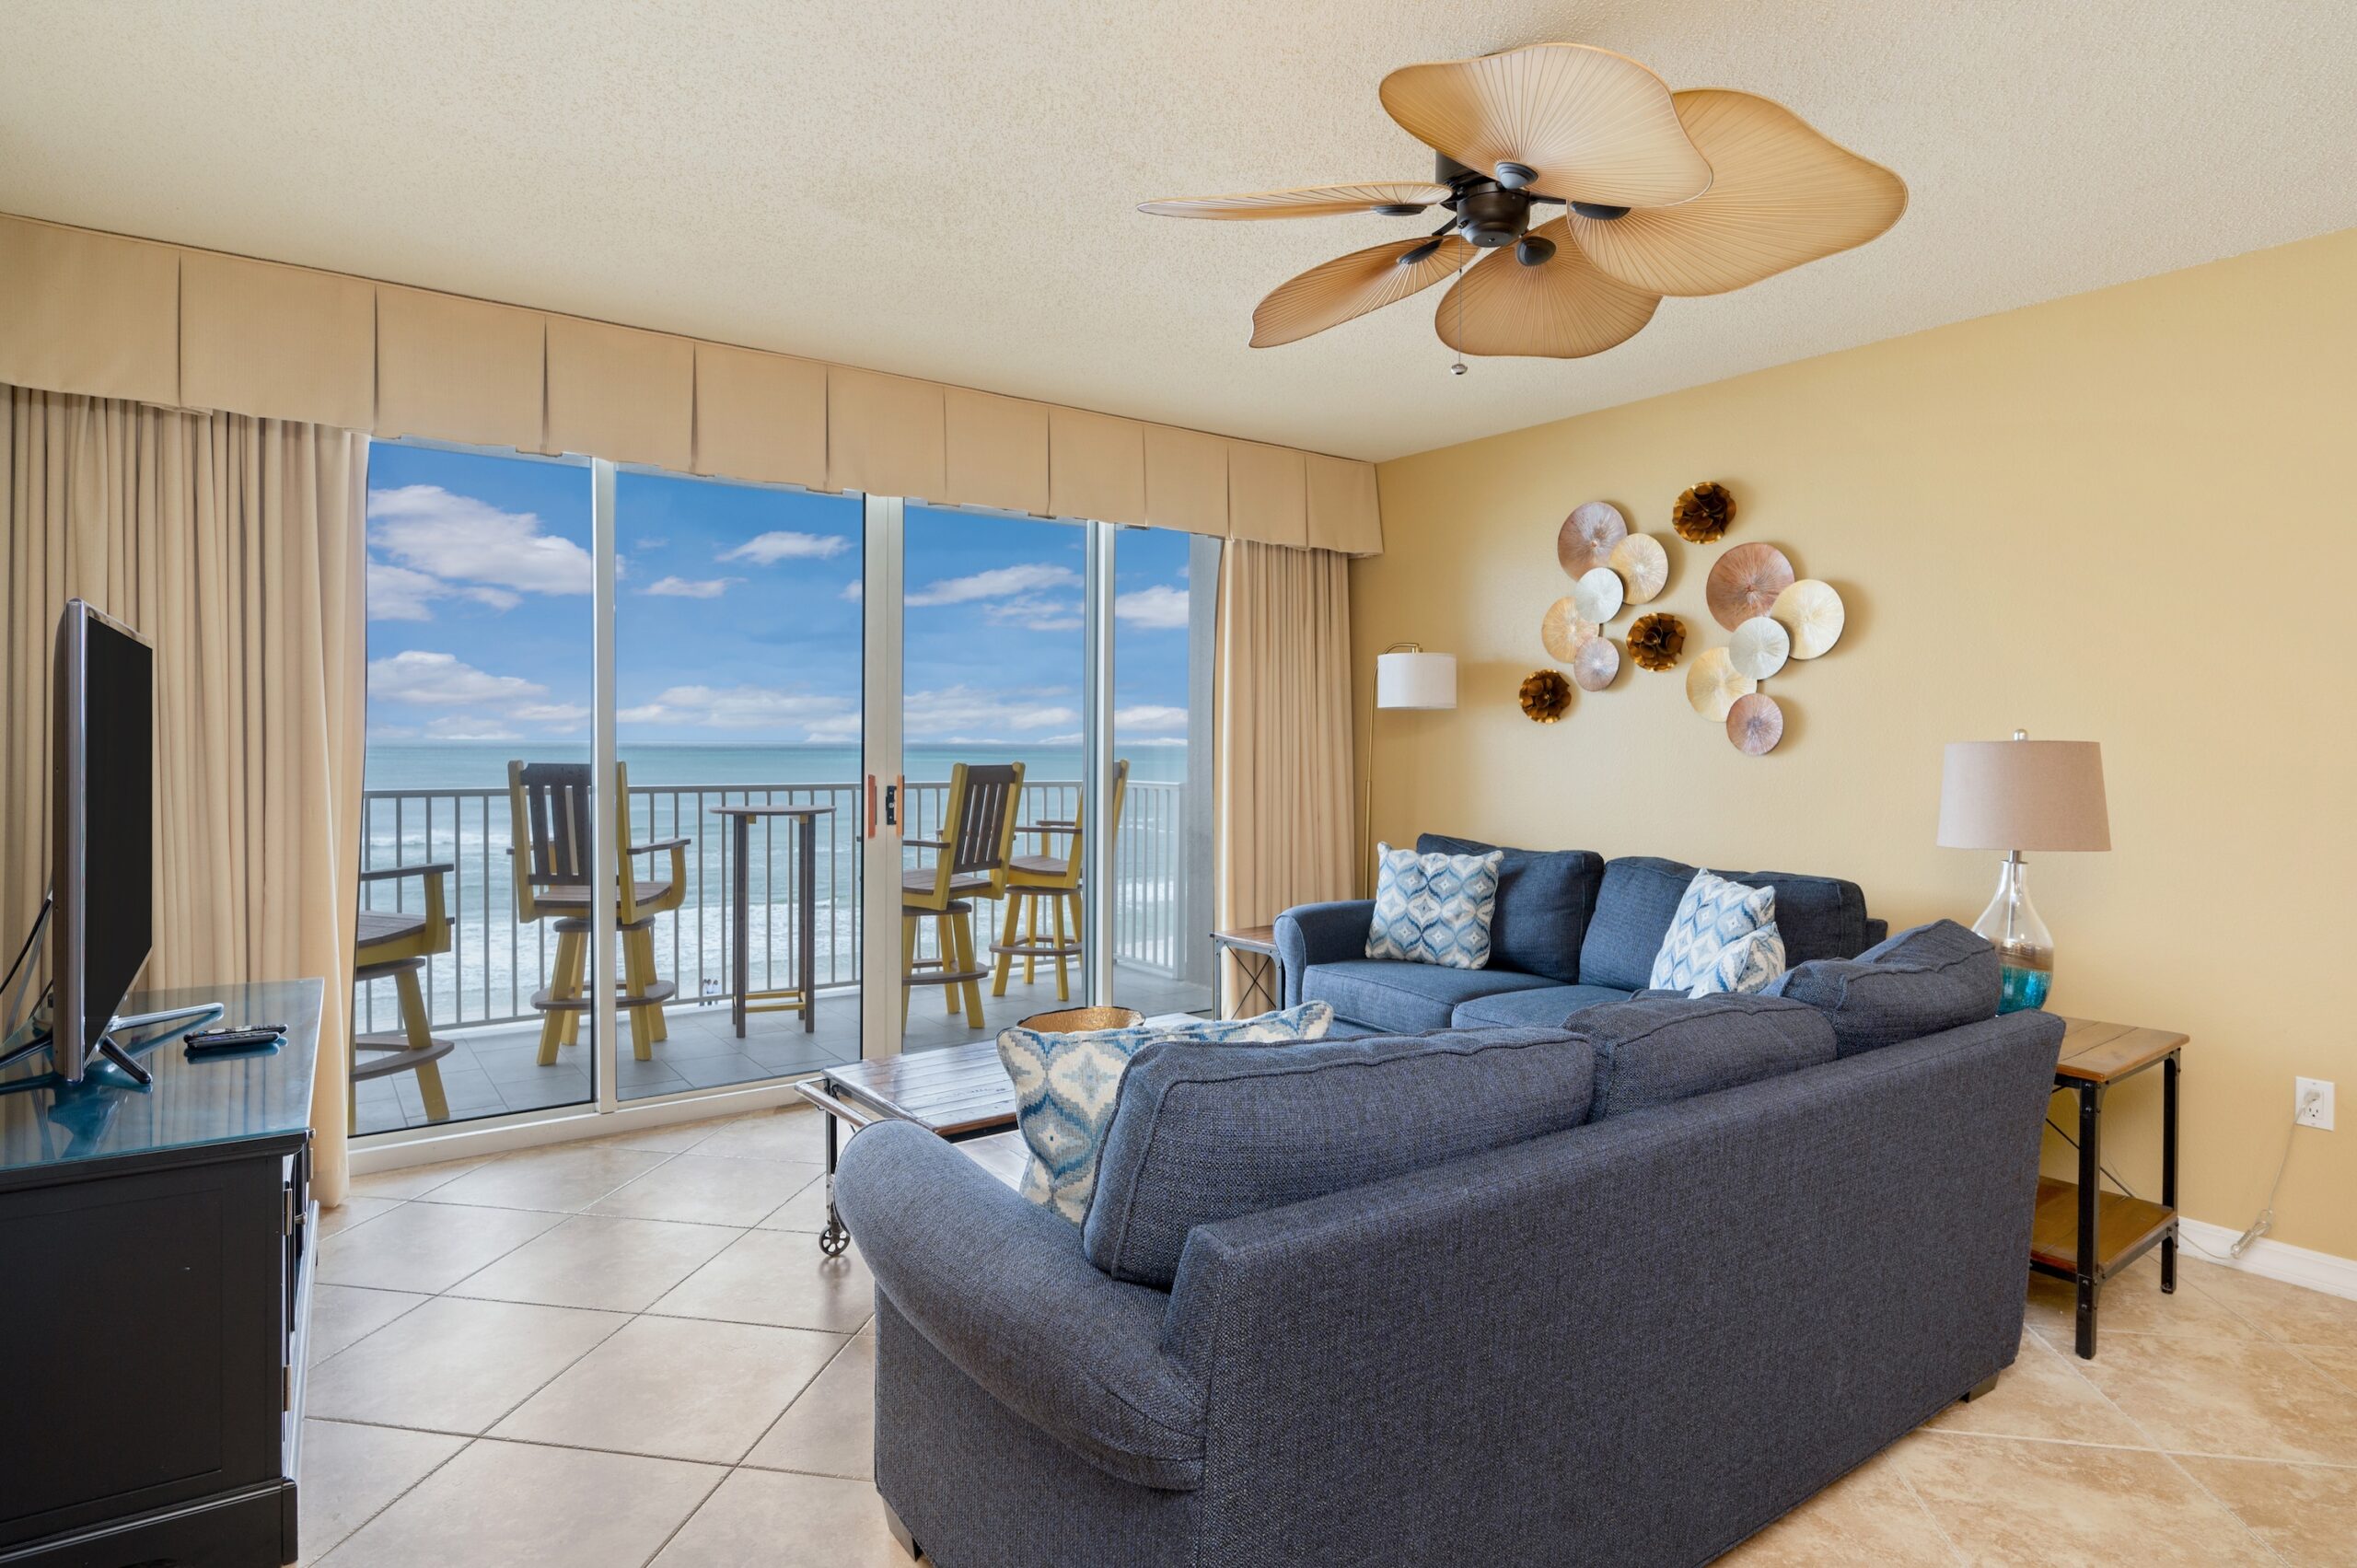 Breathtaking full ocean view from the living room of our 3-bedroom beach condo